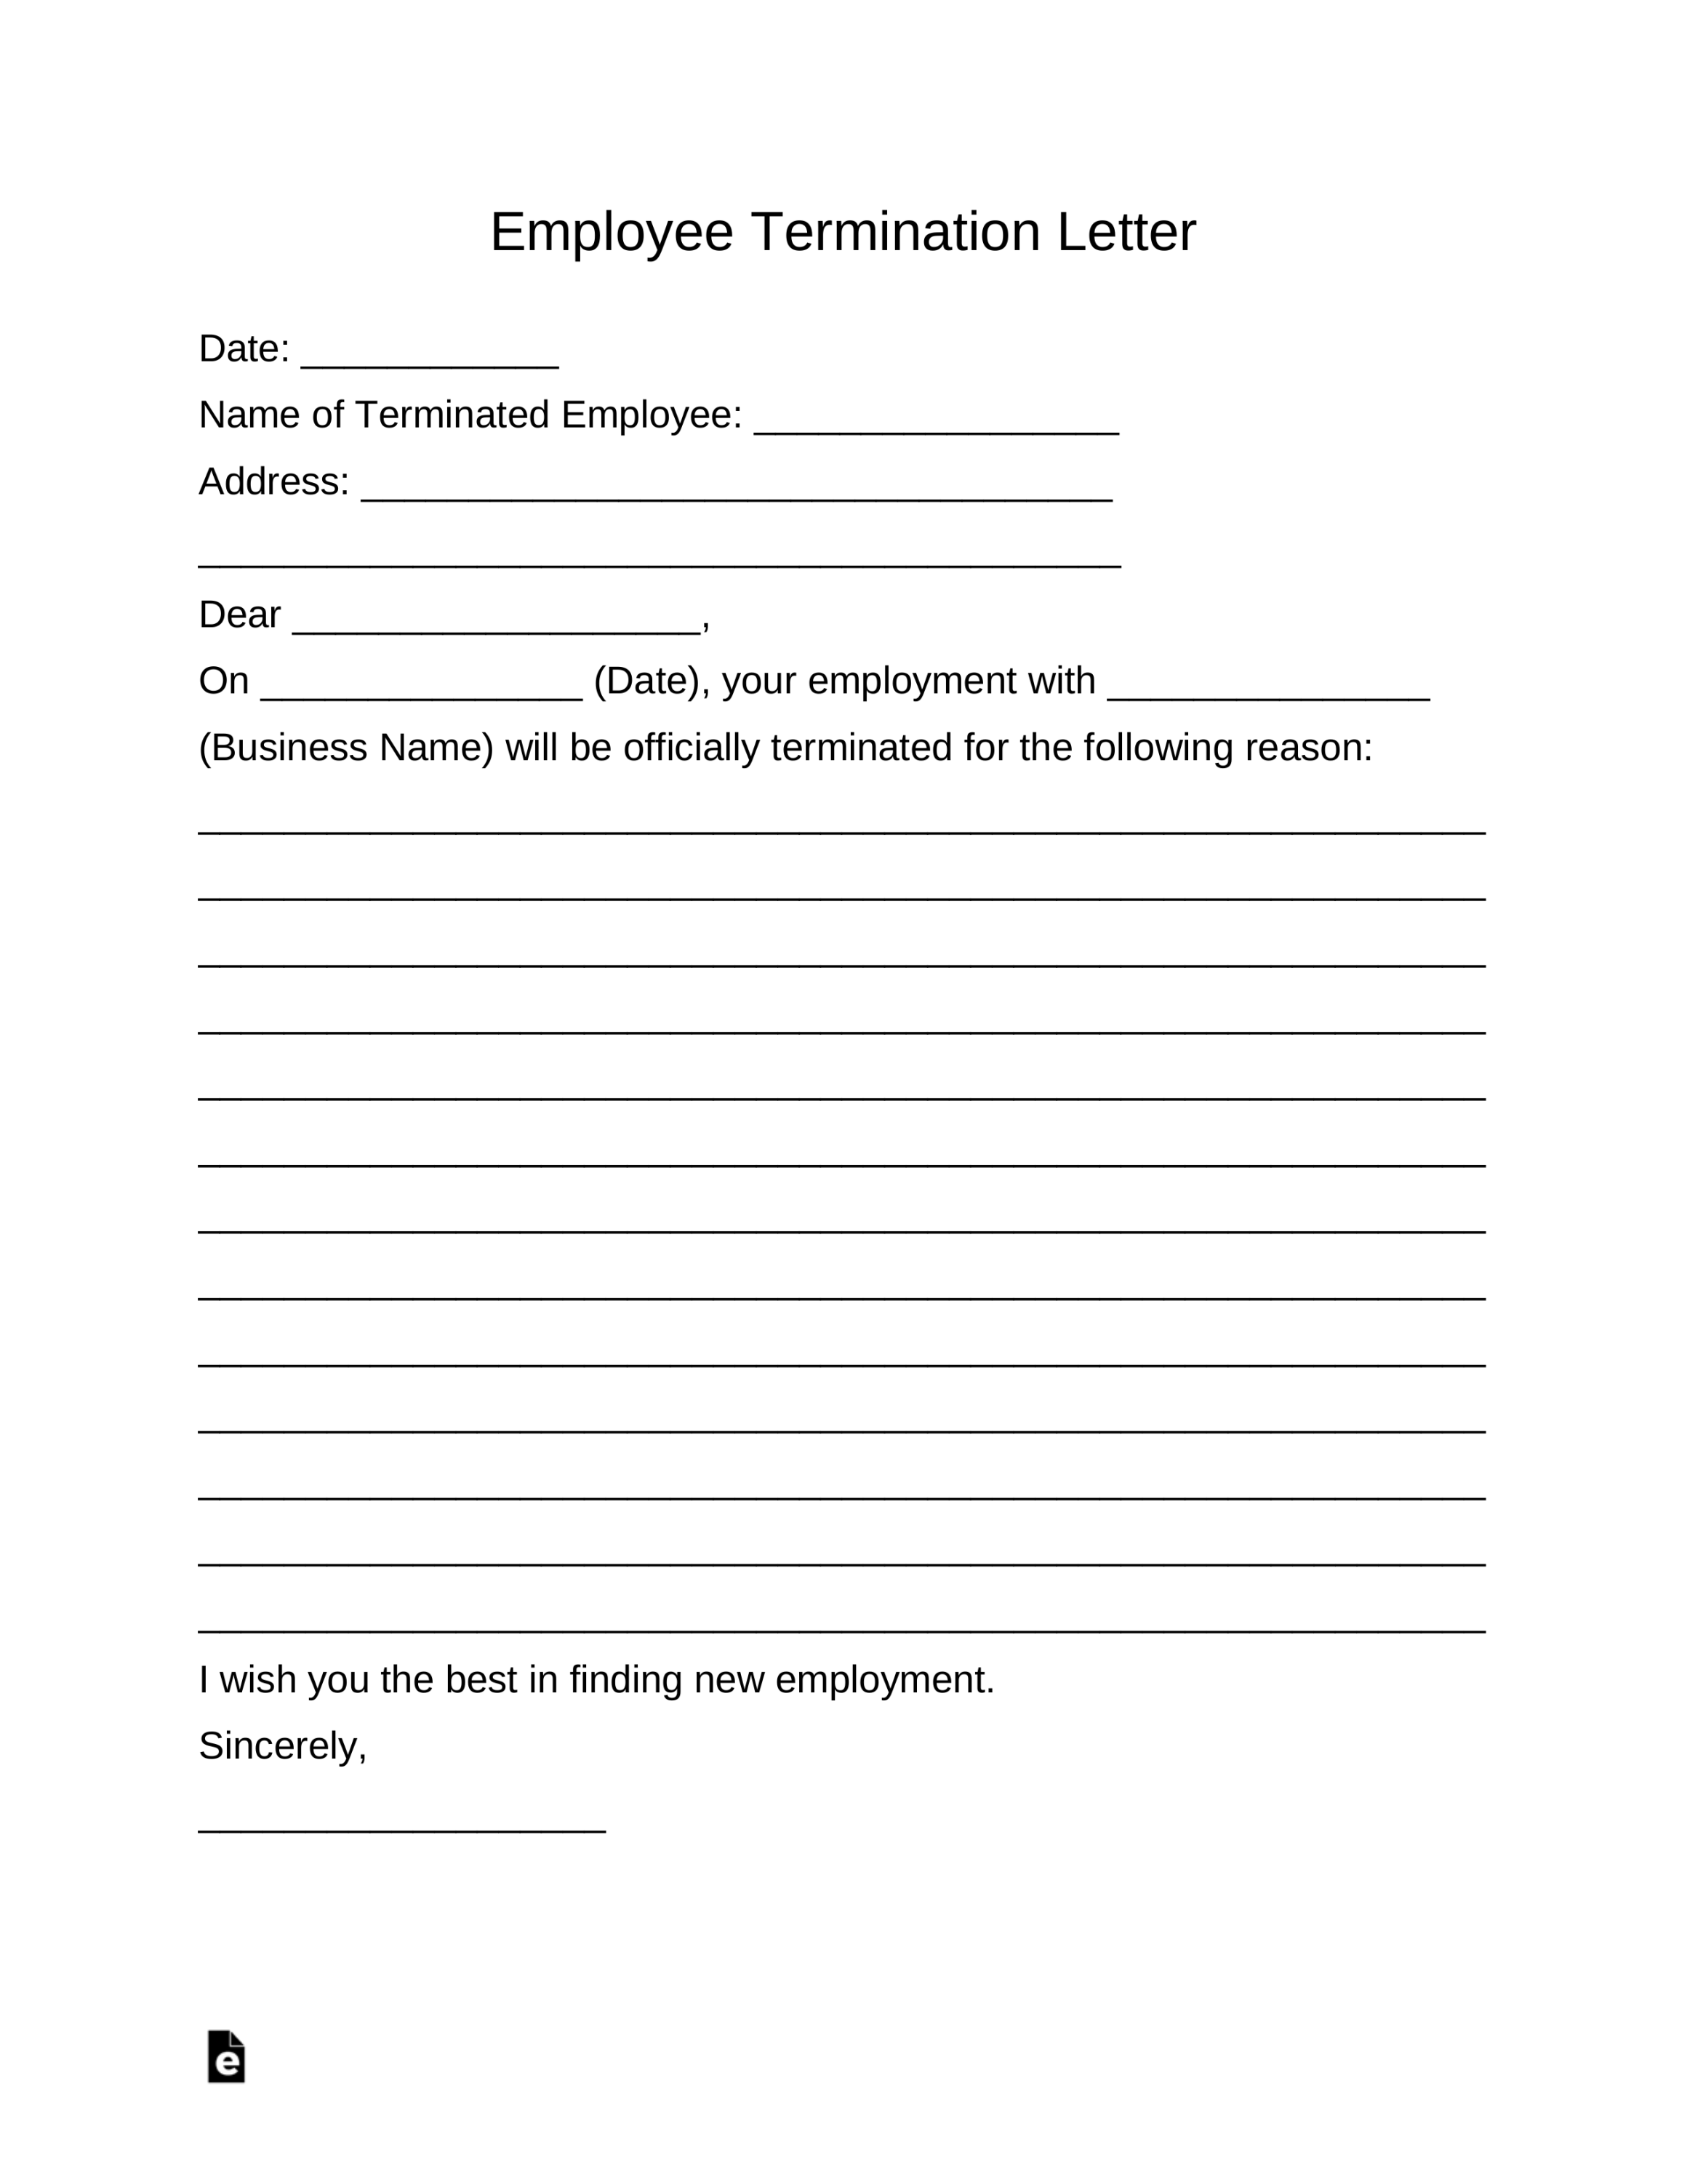 Free Employee Termination Letter Template - PDF  Word – eForms